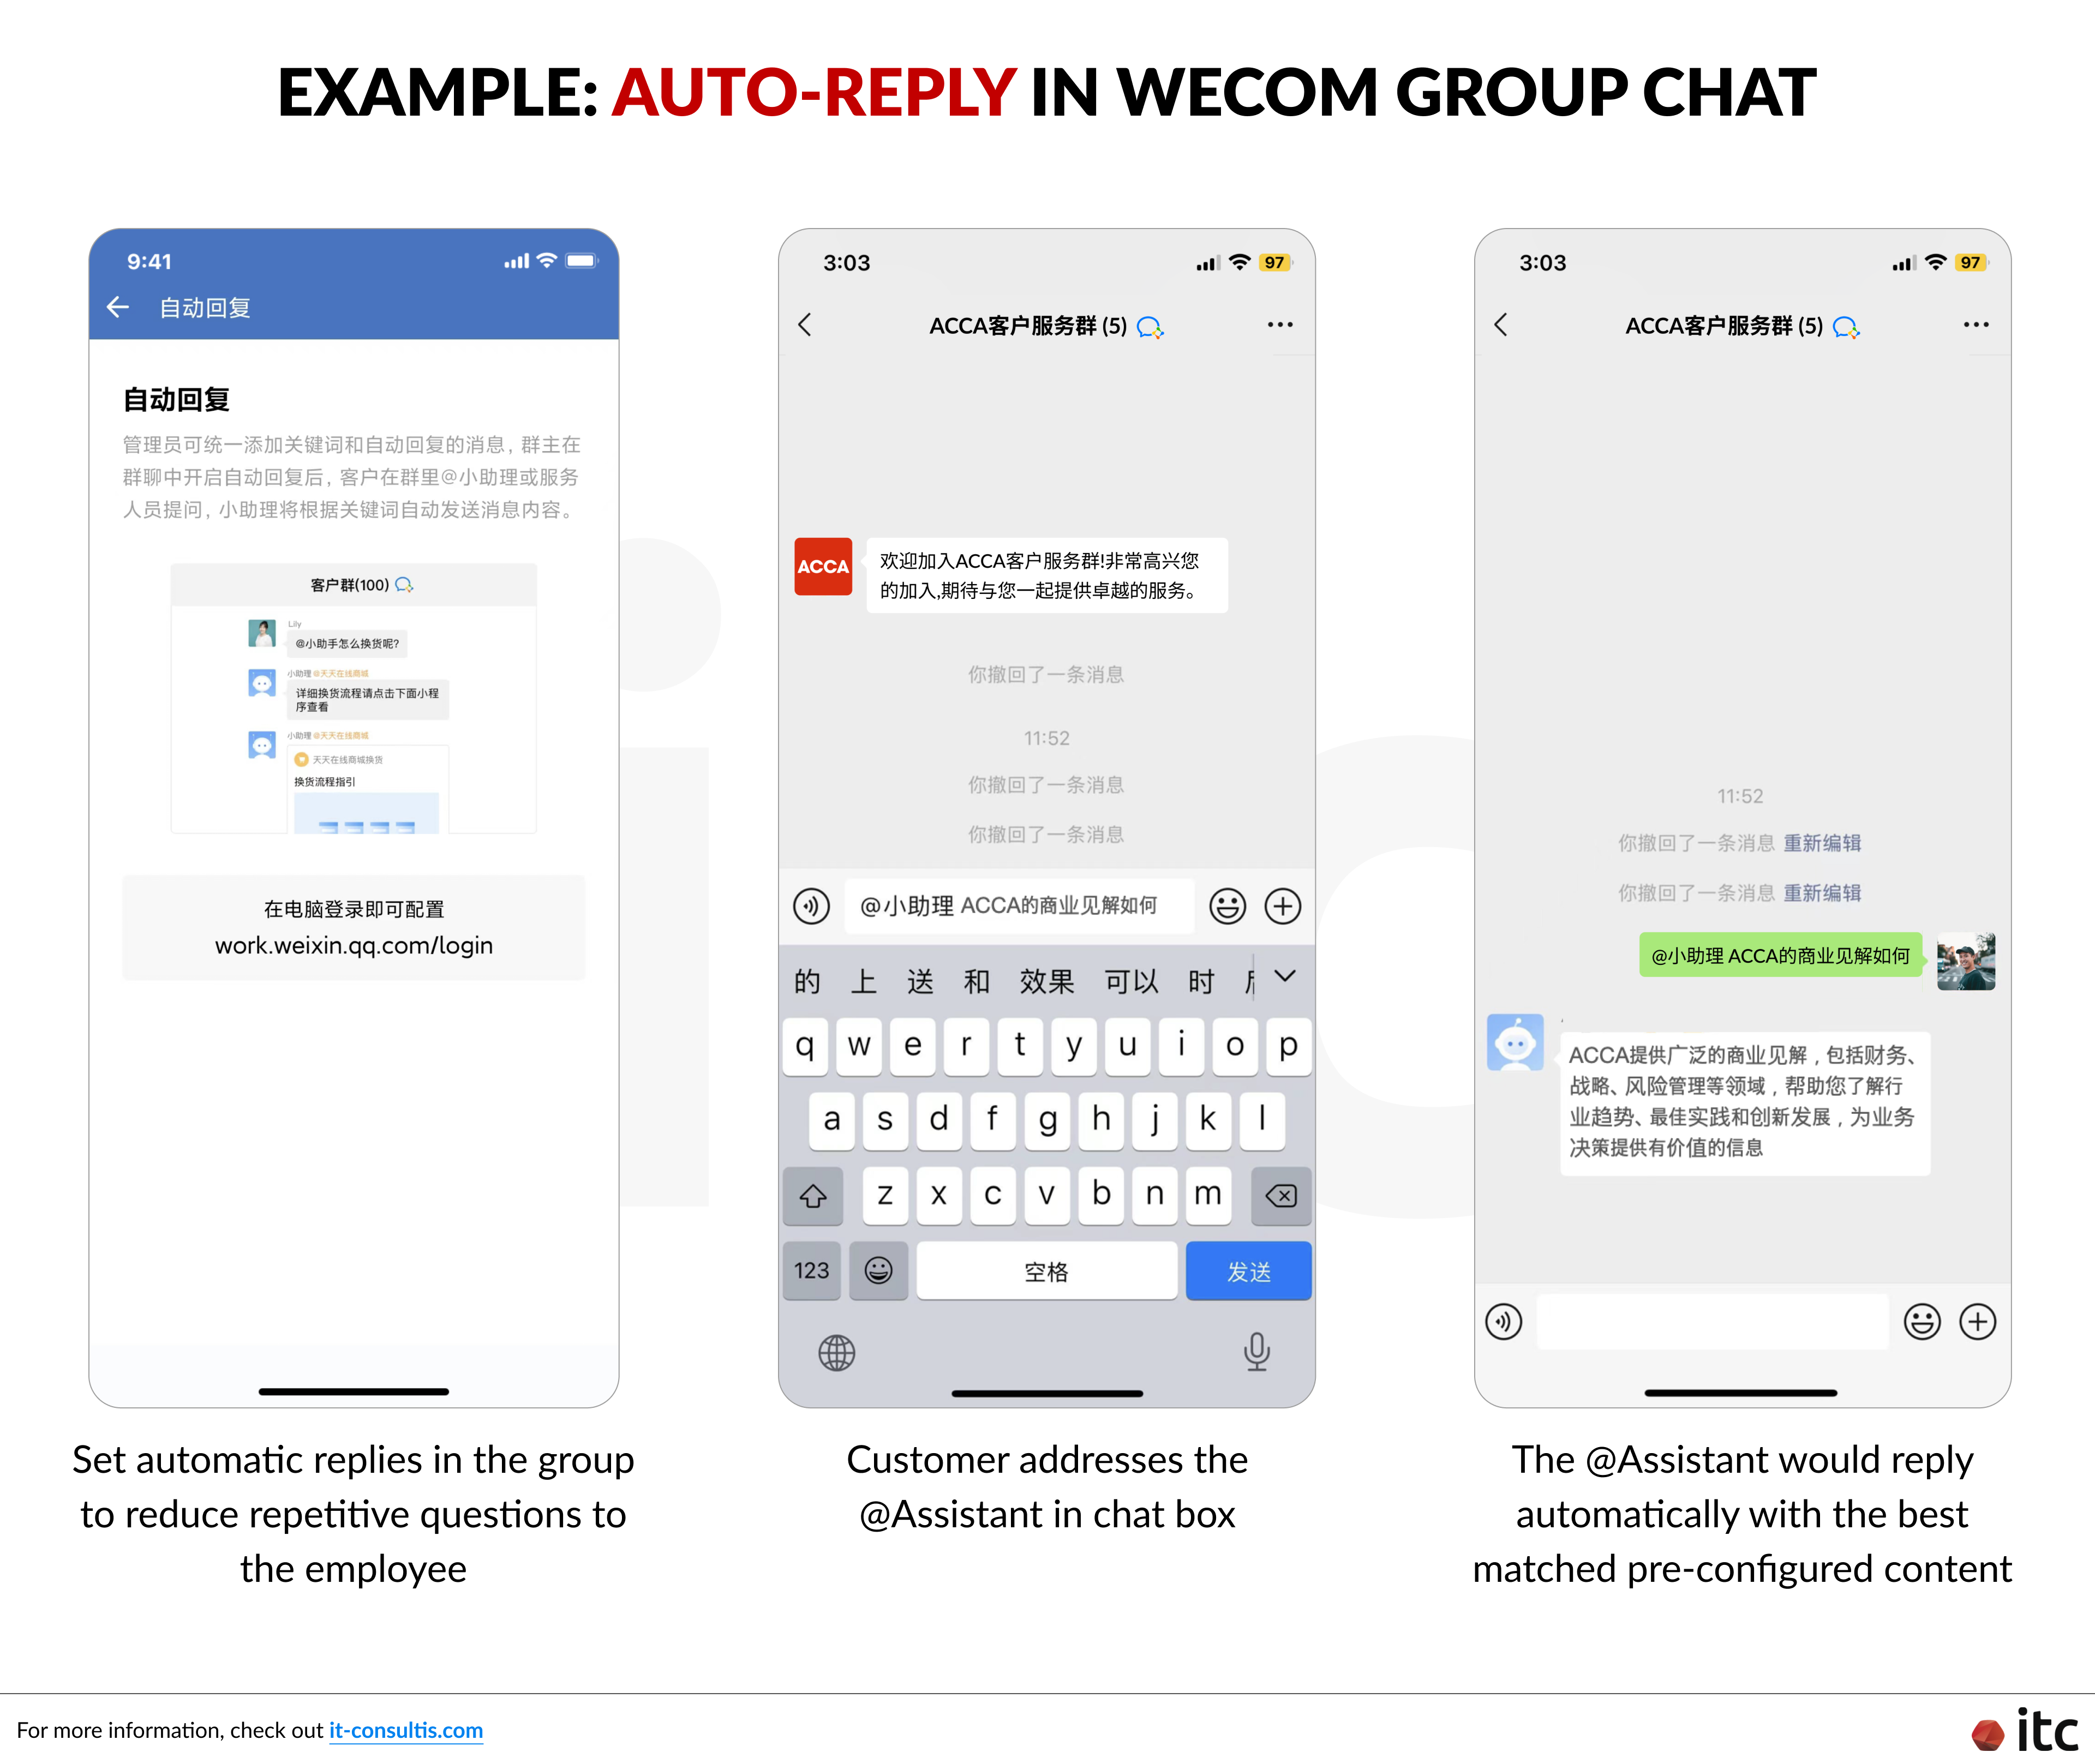 How auto-reply works in WeCom group chats